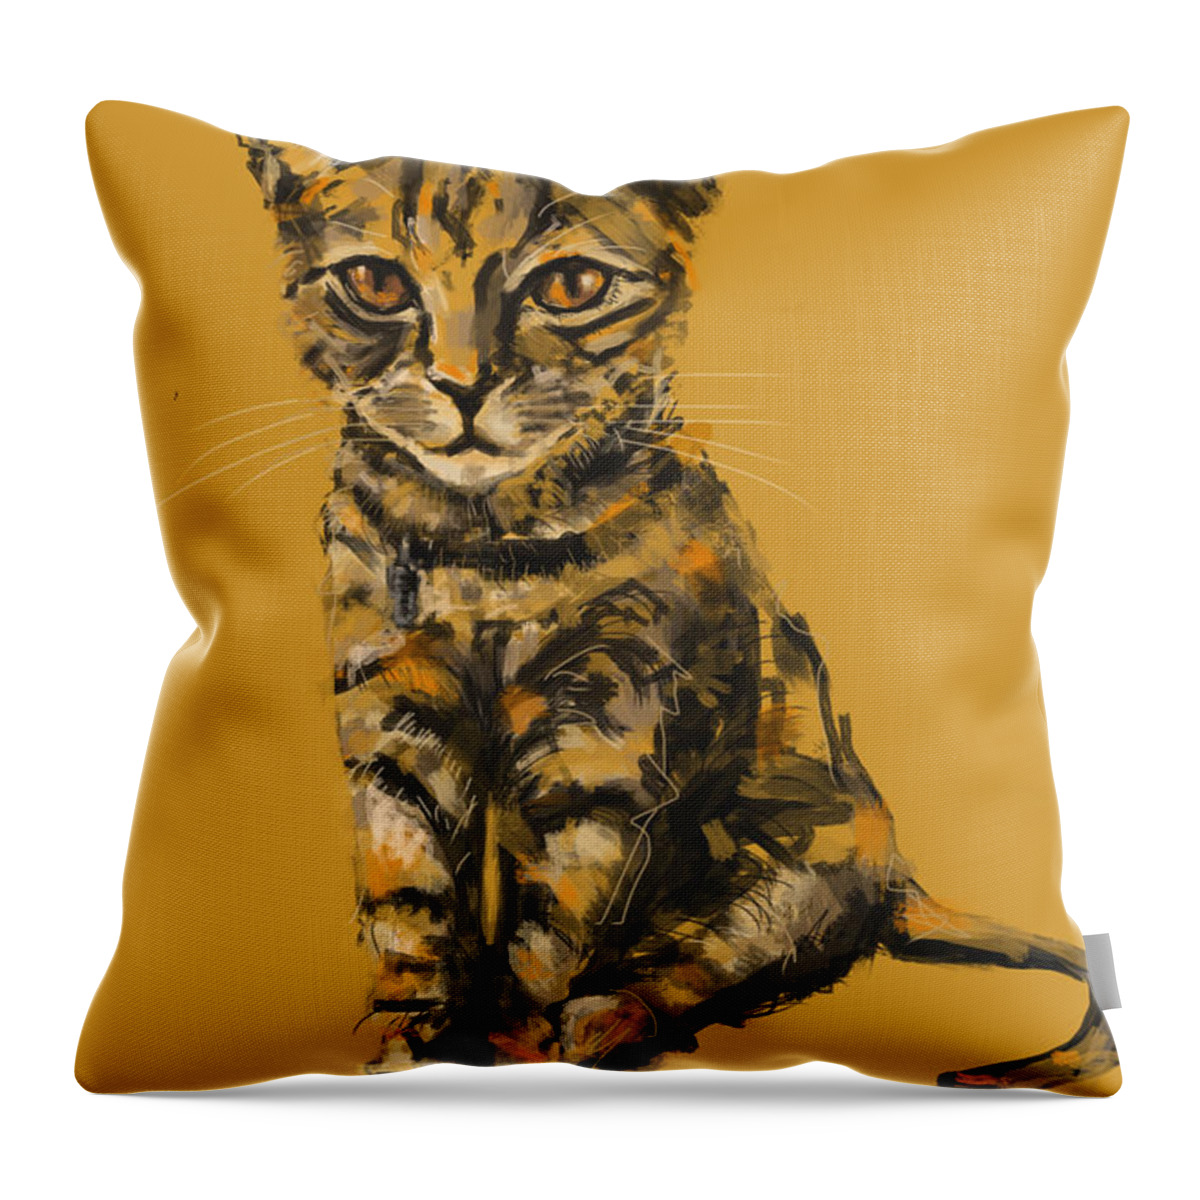 Cat Painting Throw Pillow featuring the painting Cat Bjor by Go Van Kampen